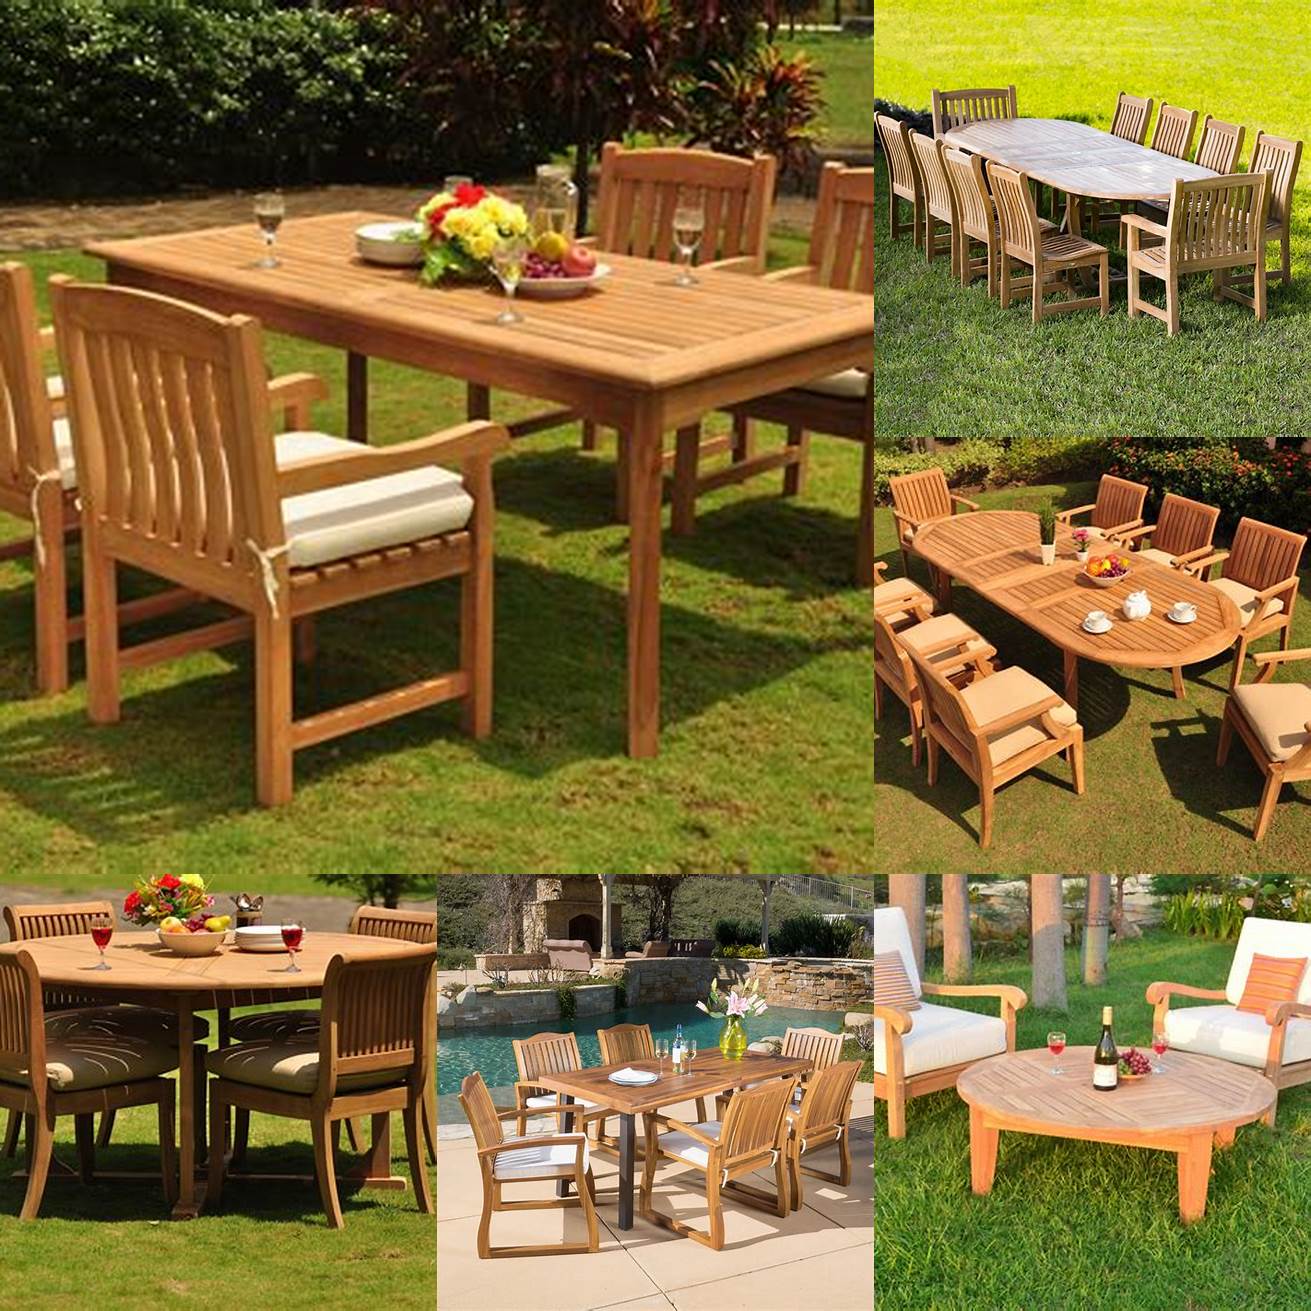 Picture of Teak Furniture in Different Settings